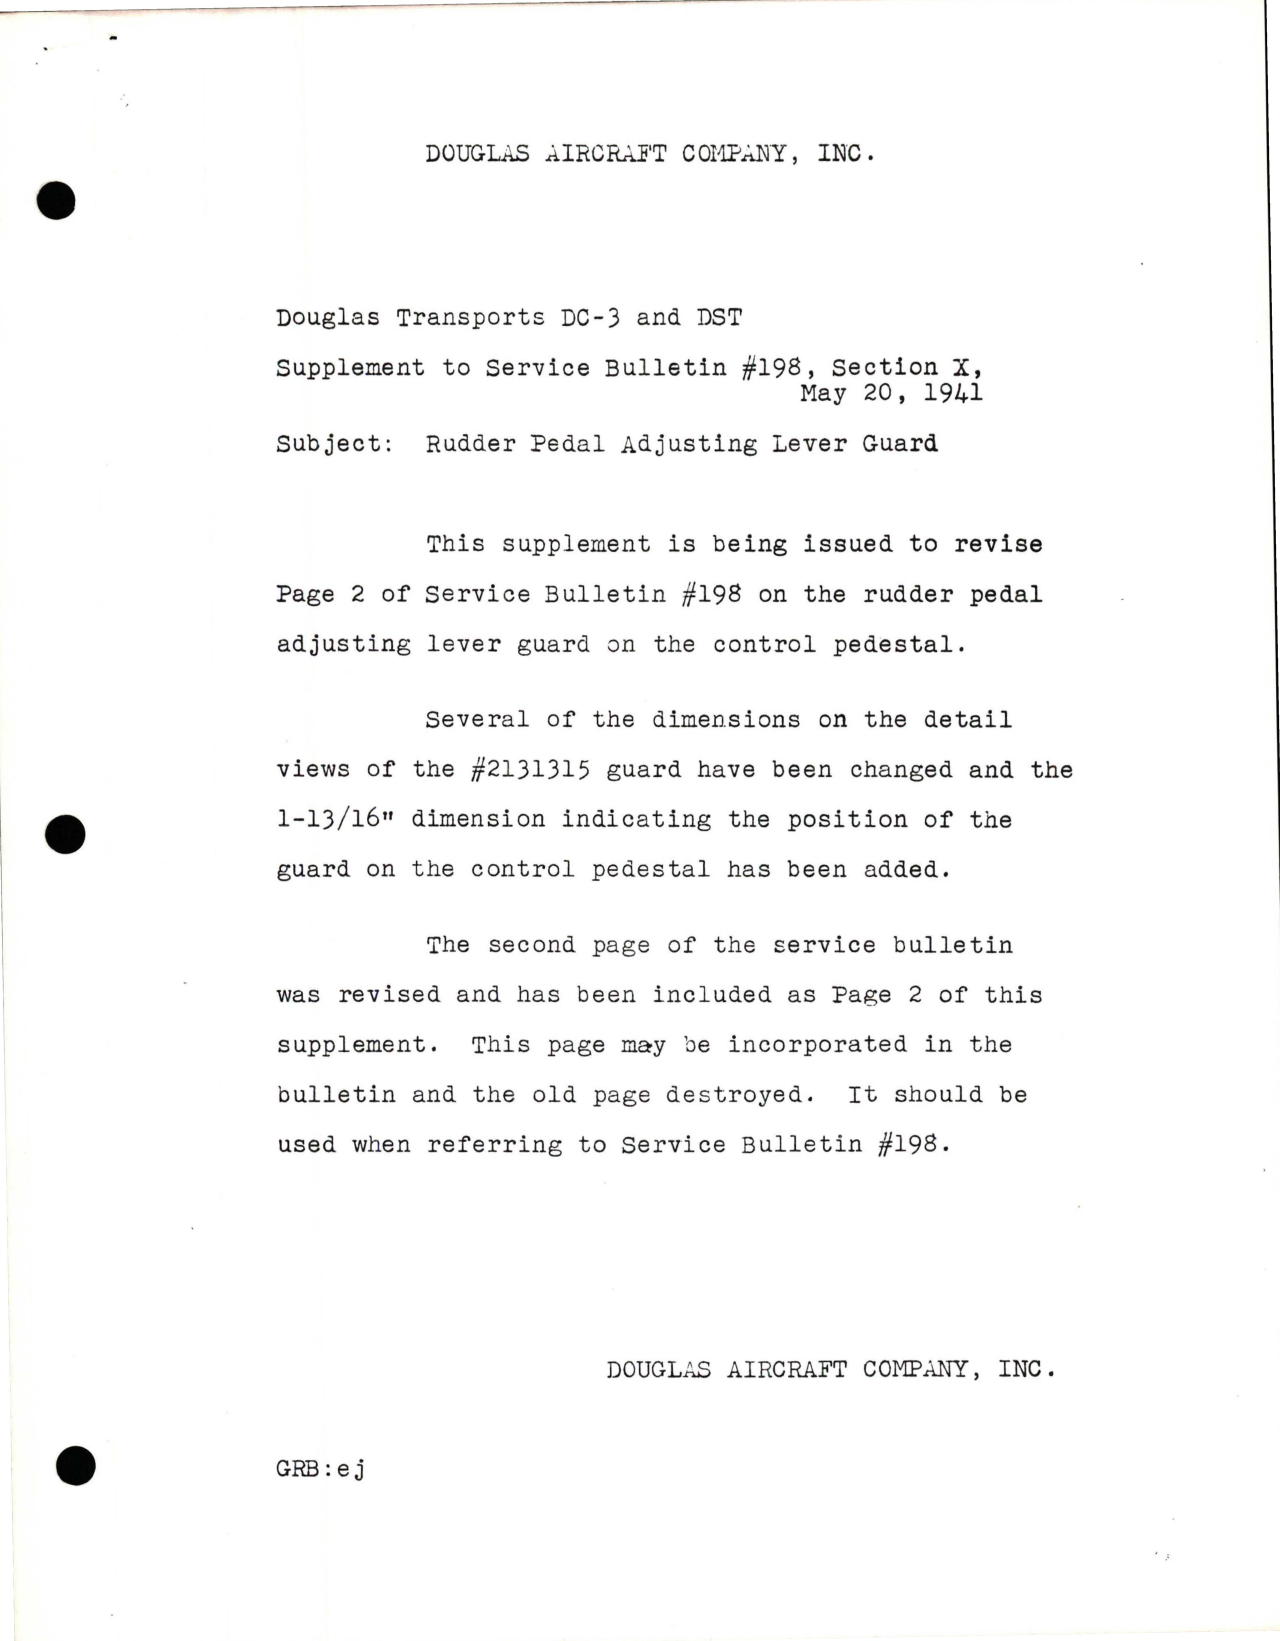 Sample page 1 from AirCorps Library document: Rudder Pedal Adjusting Lever Guard